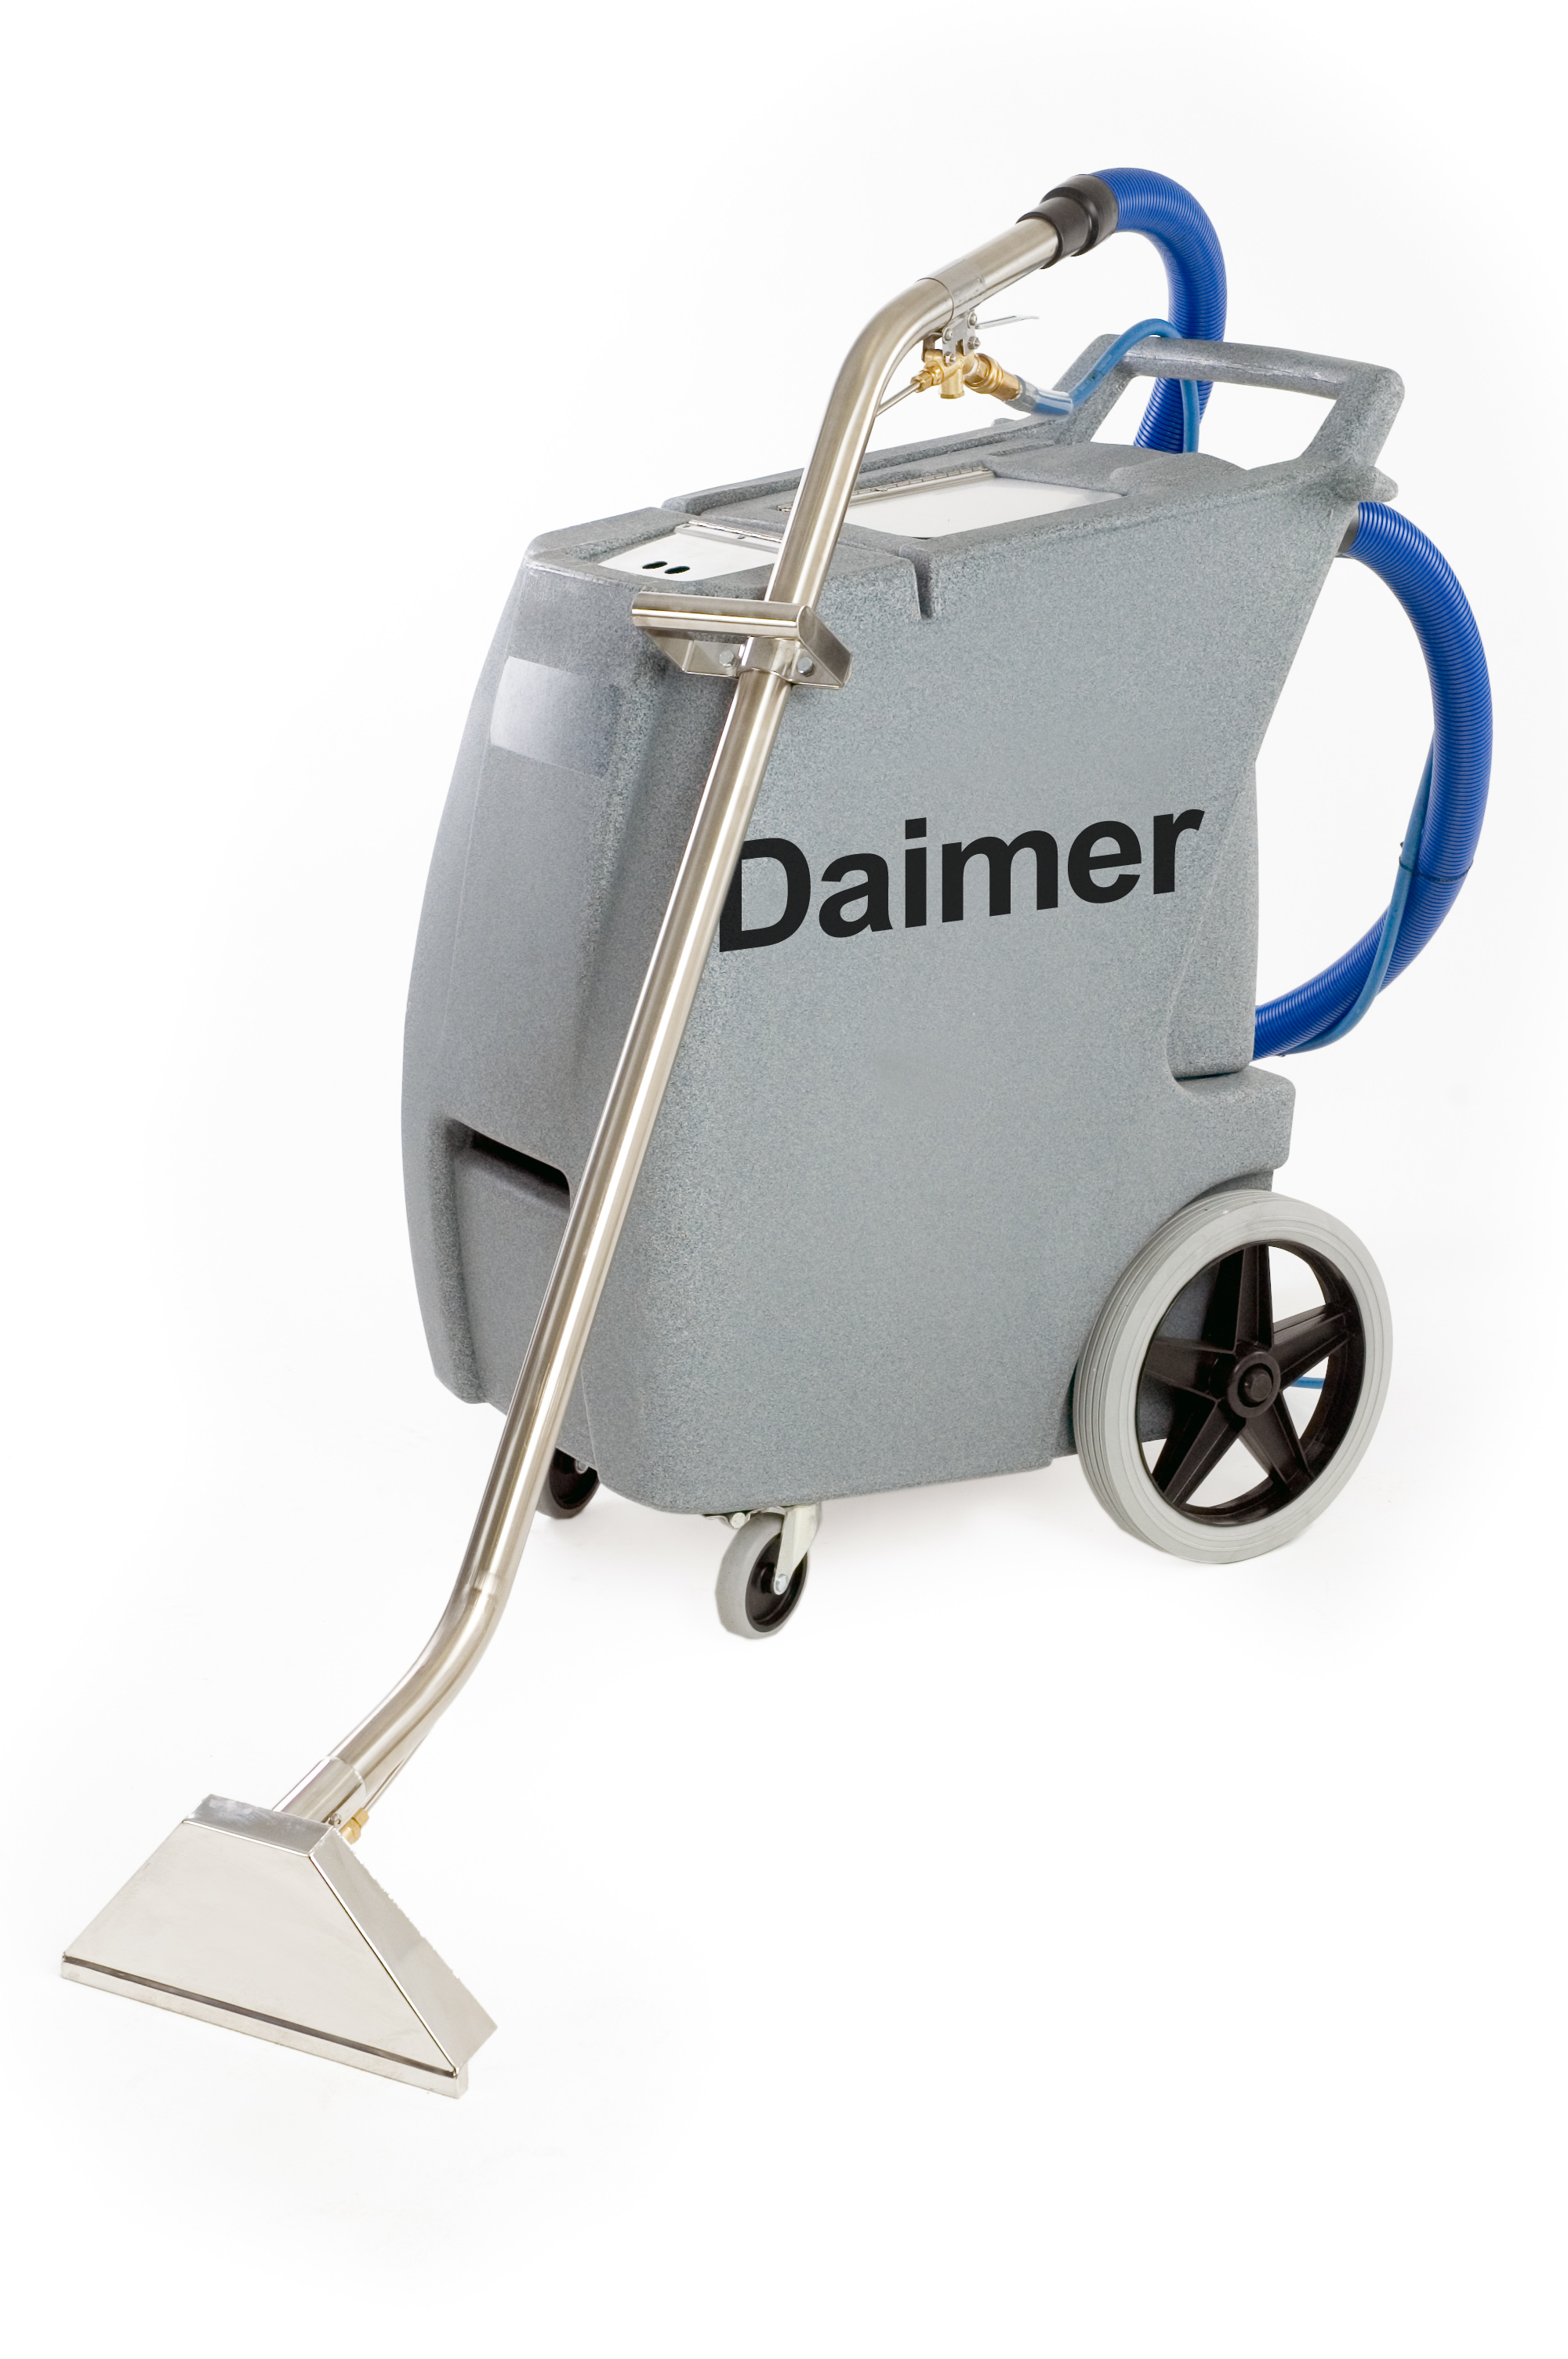 Steam Carpet Cleaners For Commercial Applications From Daimer Industries®